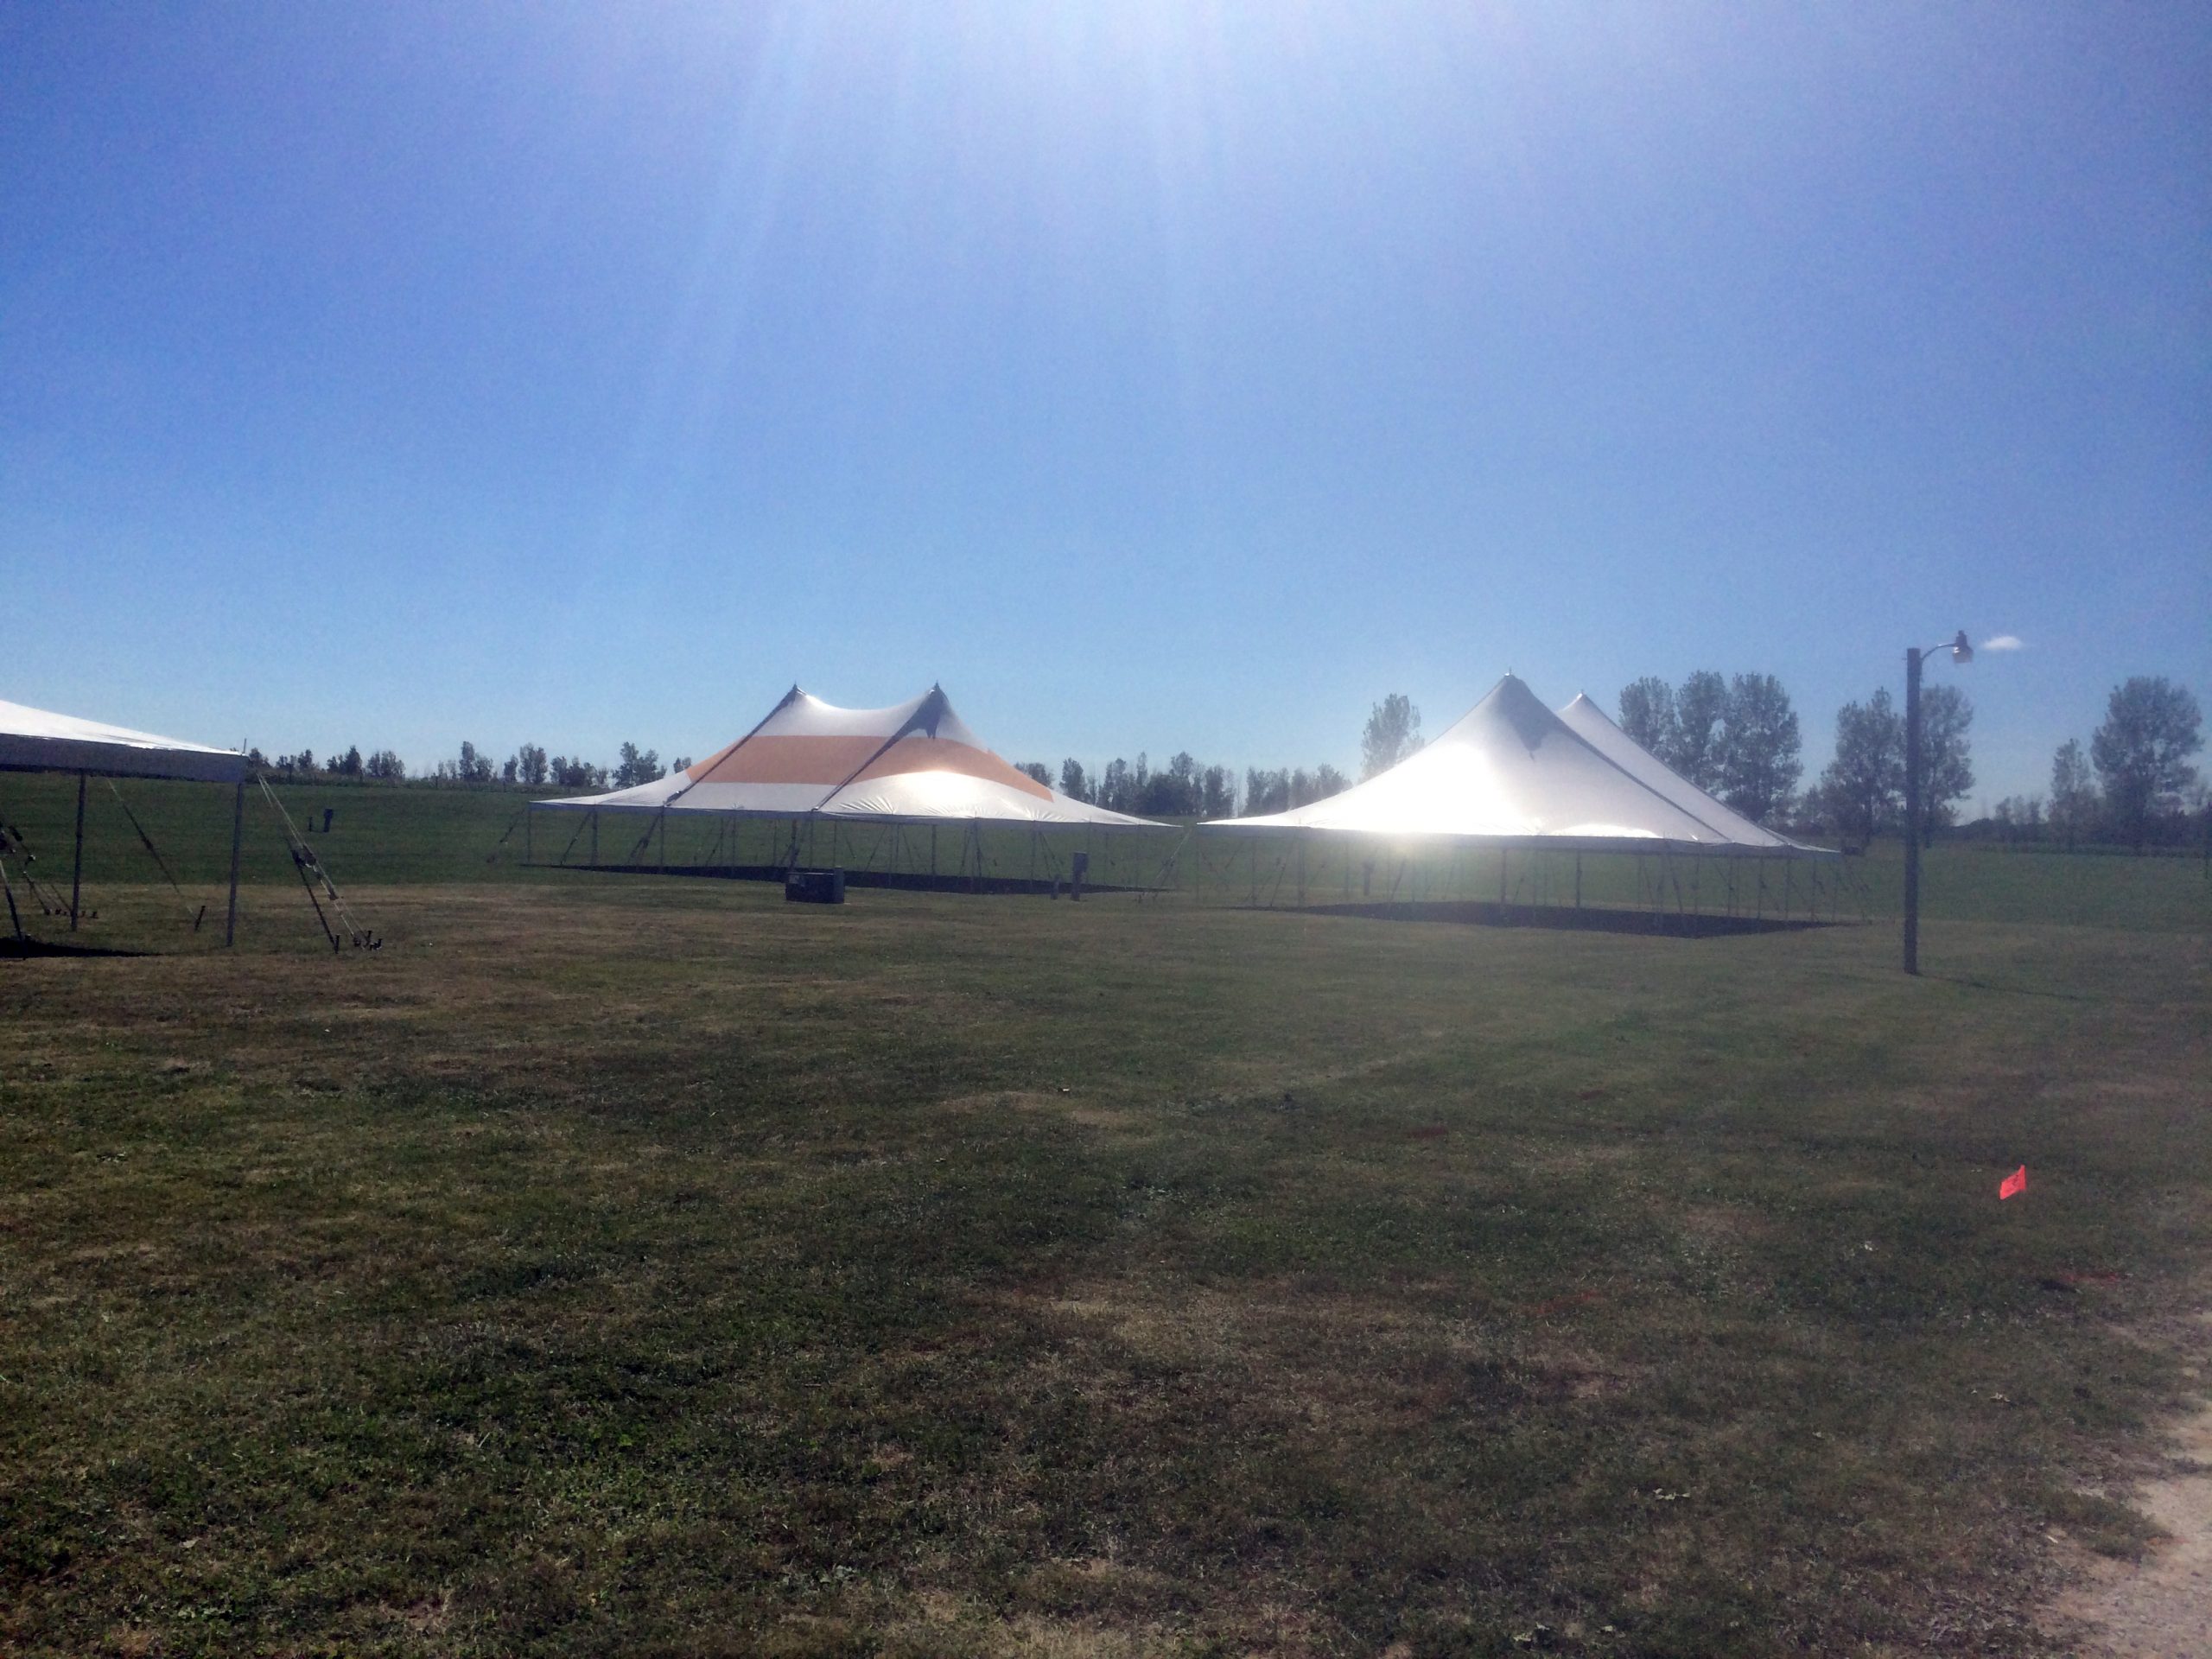 20′ x 40′ and 40′ x 60′ rope and pole tents in Amana Colonies